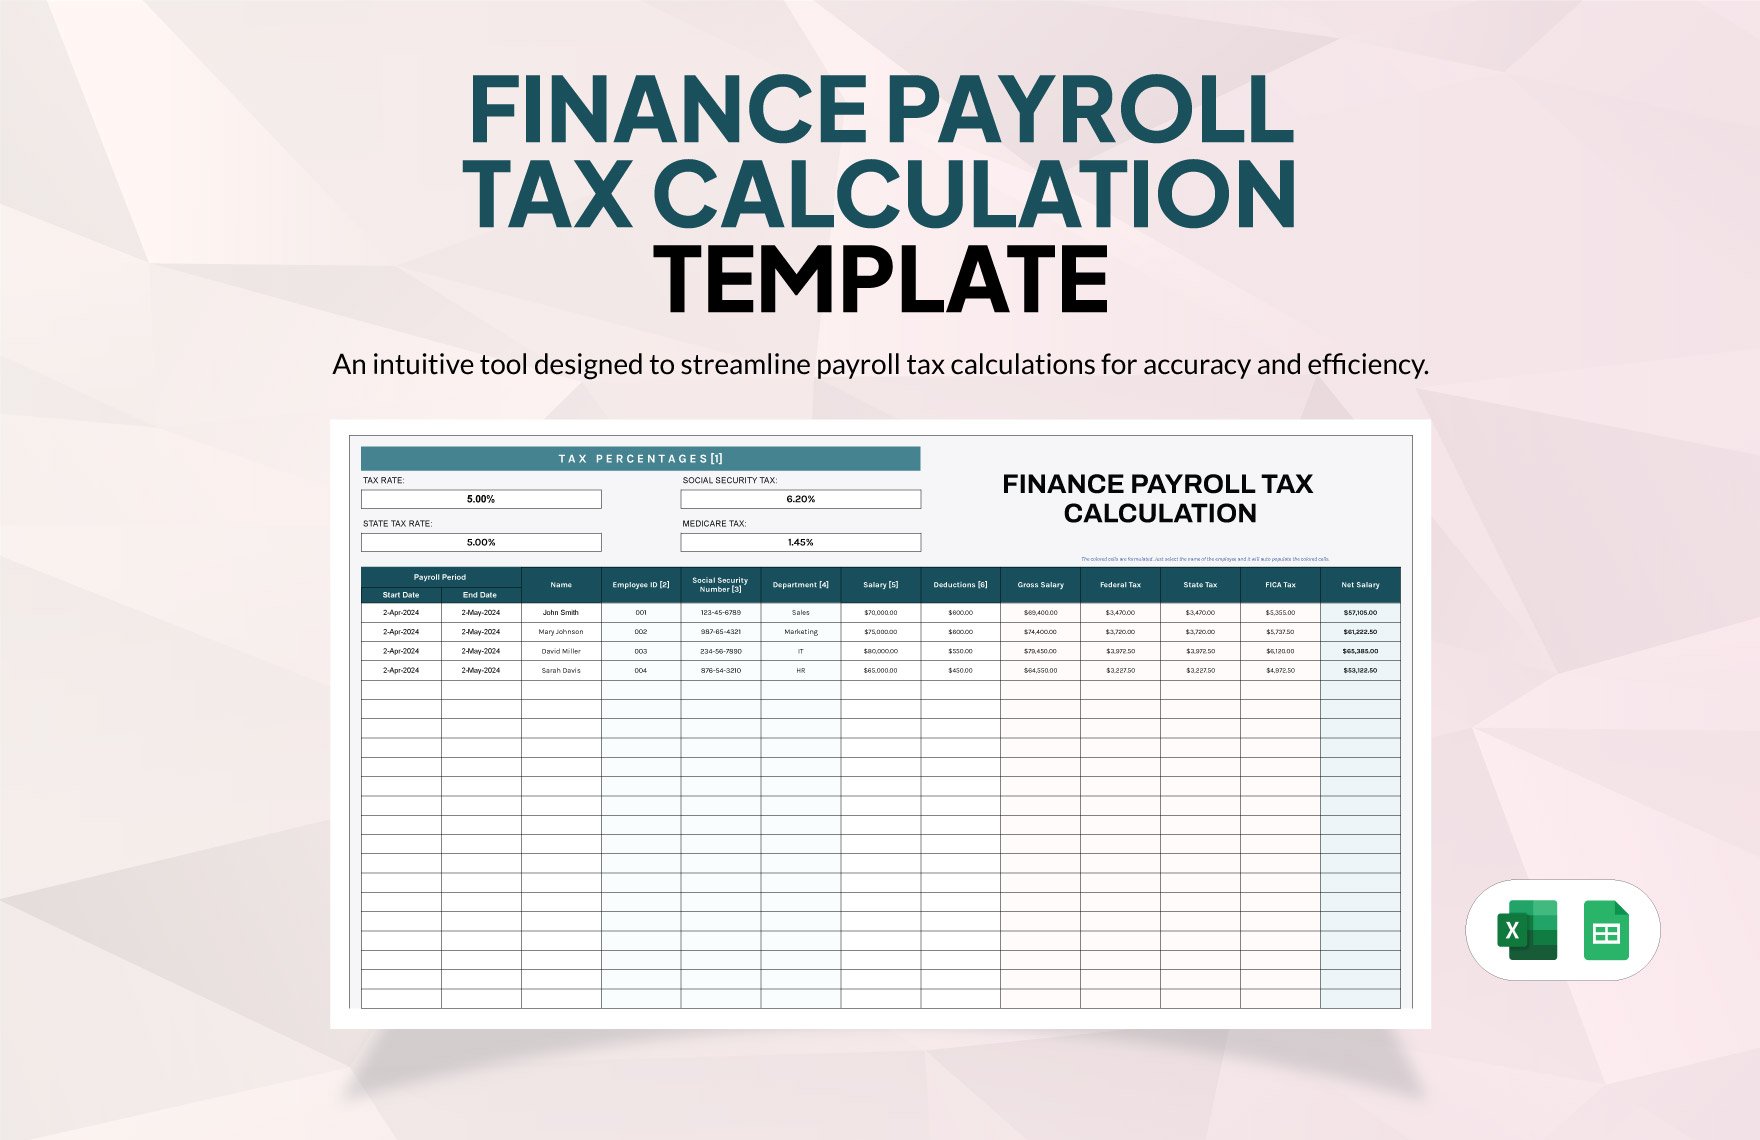 Finance Payroll Tax Calculation Template in Excel, Google Sheets